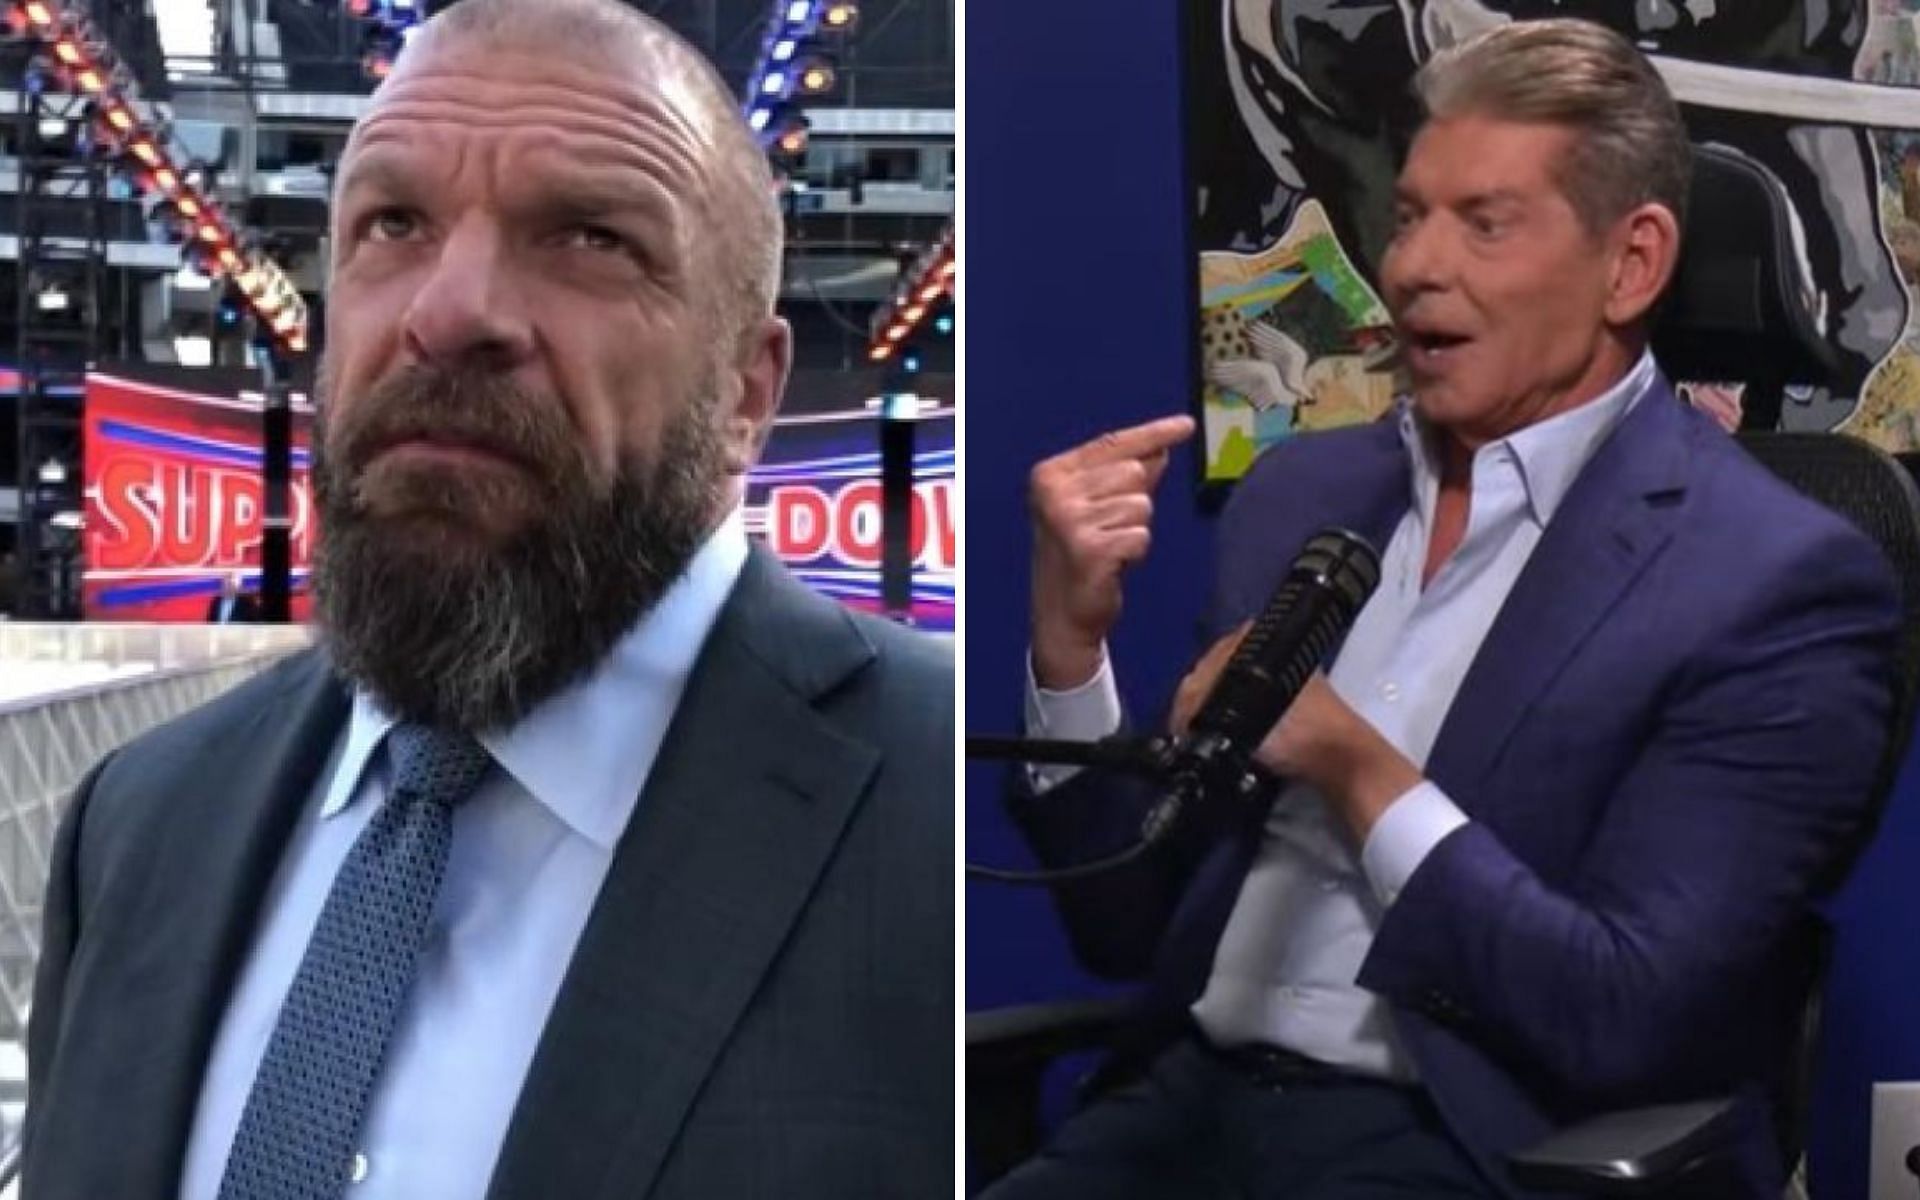 The Game (left); The former CEO and Chairman of WWE (right)